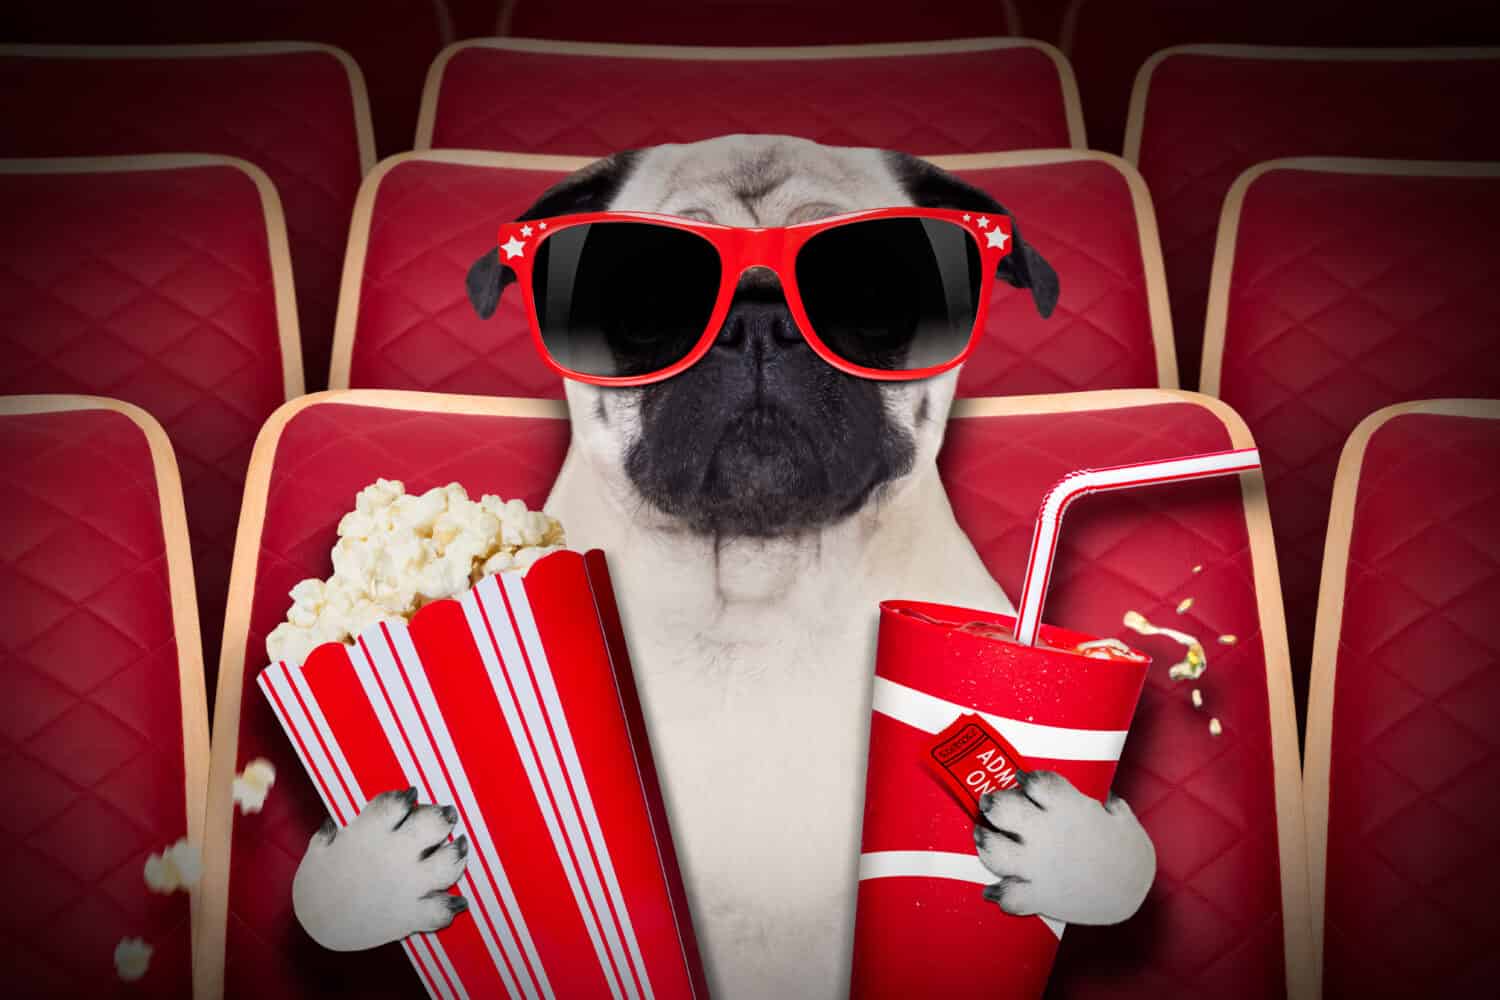 dog watching a movie in a cinema theater, with soda and popcorn wearing glasses